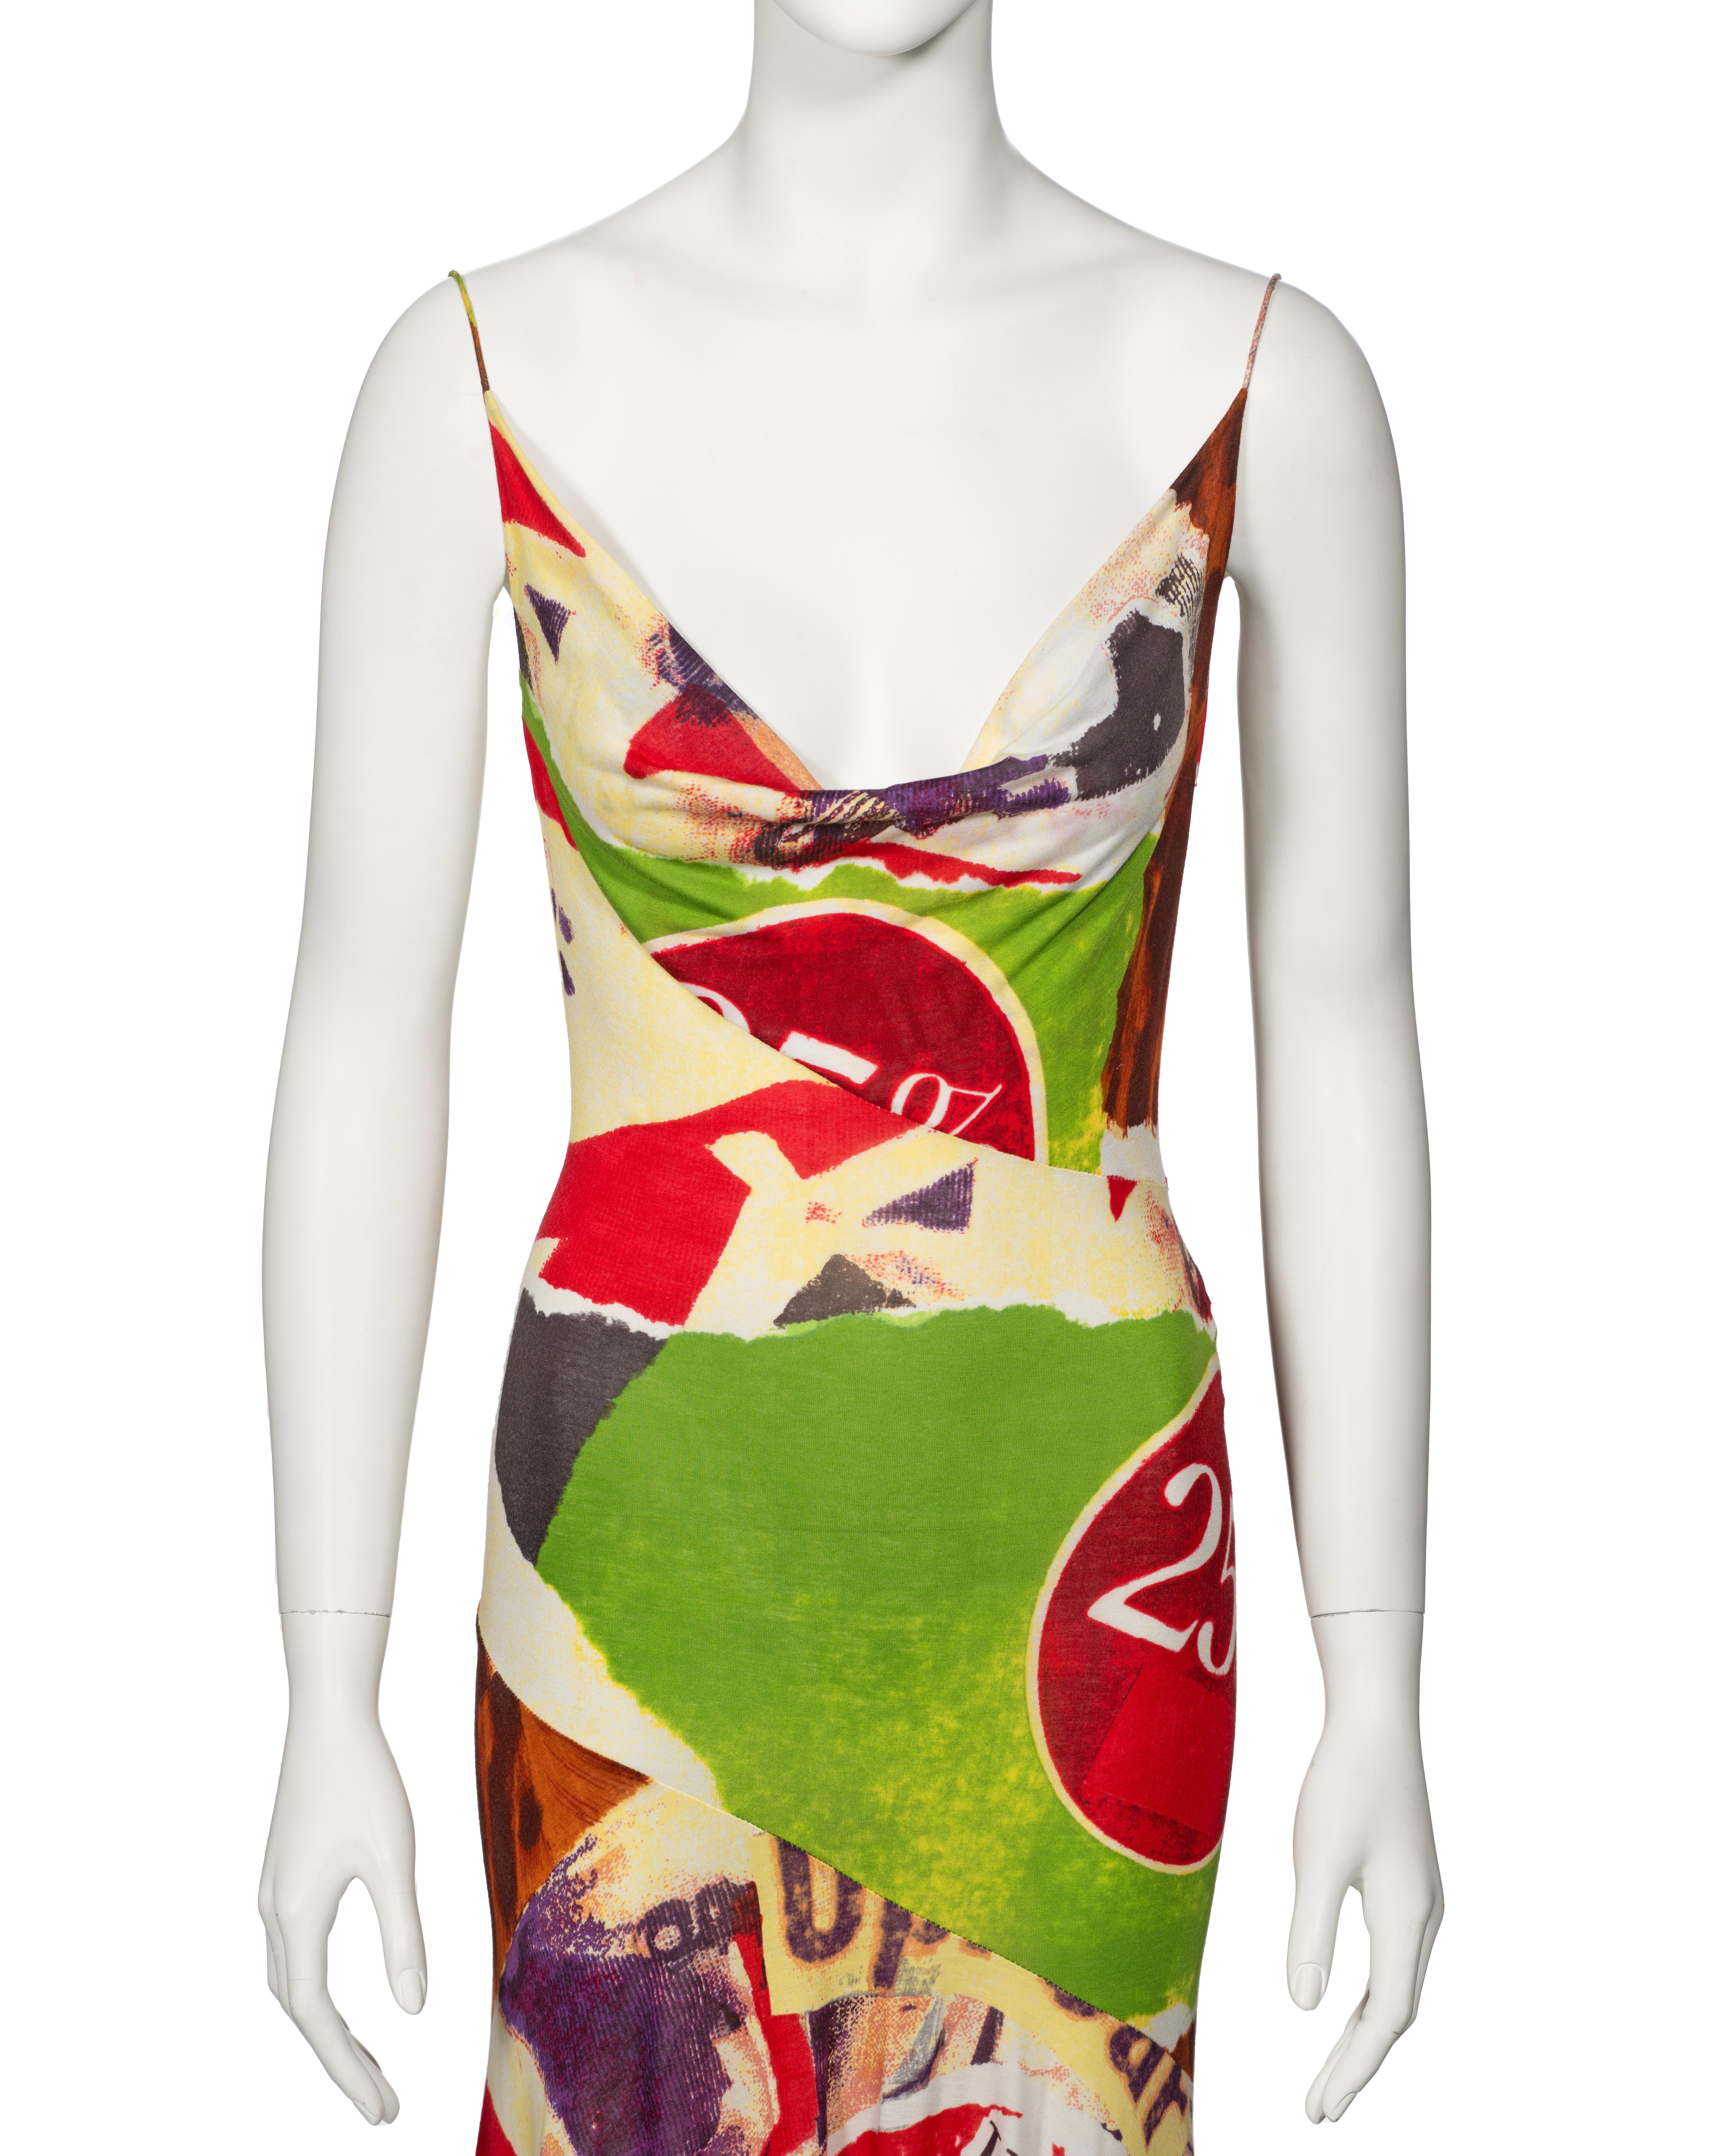 Christian Dior by John Galliano Montage Print Silk Jersey Dress, ss 2003 In Excellent Condition For Sale In London, GB